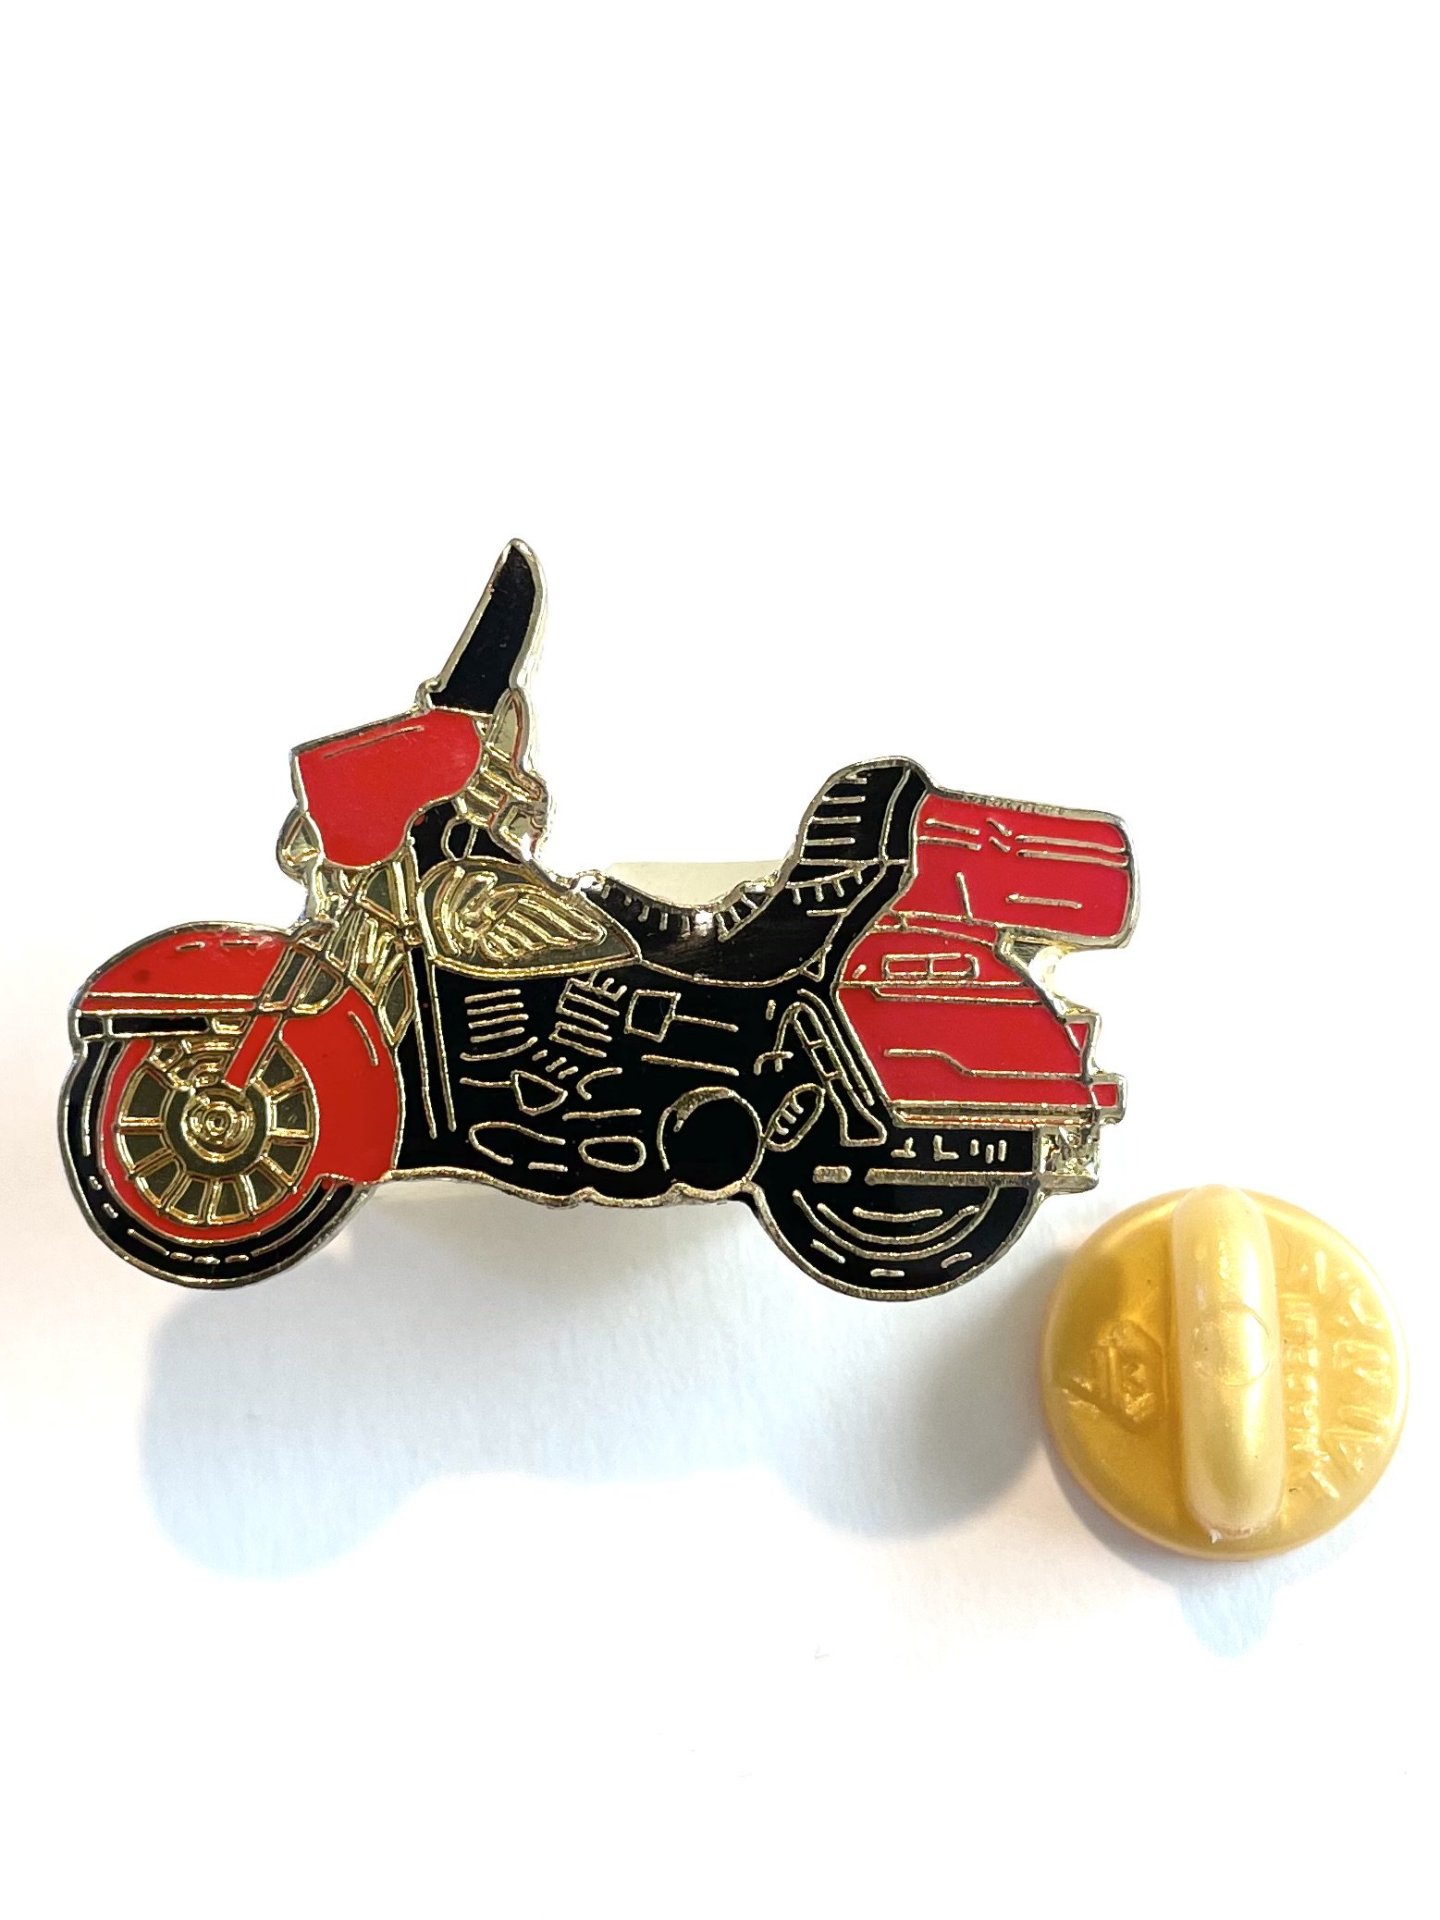 <img class='new_mark_img1' src='https://img.shop-pro.jp/img/new/icons2.gif' style='border:none;display:inline;margin:0px;padding:0px;width:auto;' />1980's RED MOTORCYCLE PINS DEADSTOCK